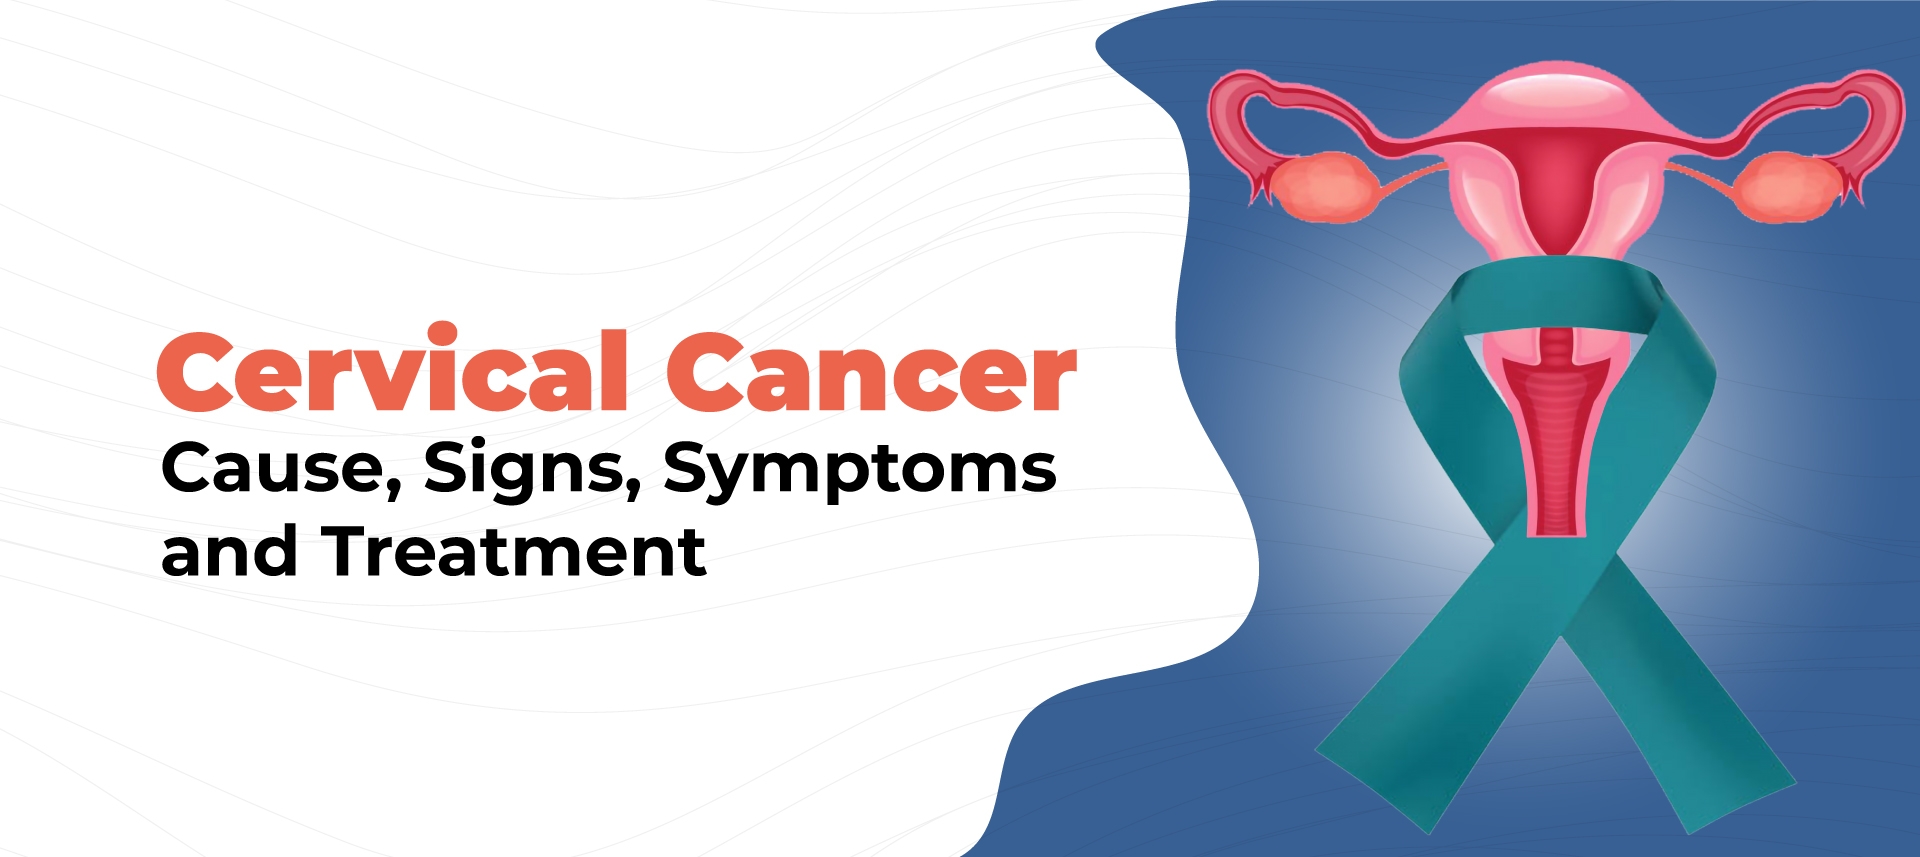 Cervical Cancer: Causes, Signs, Symptoms and Treatment - Rocket Health ...